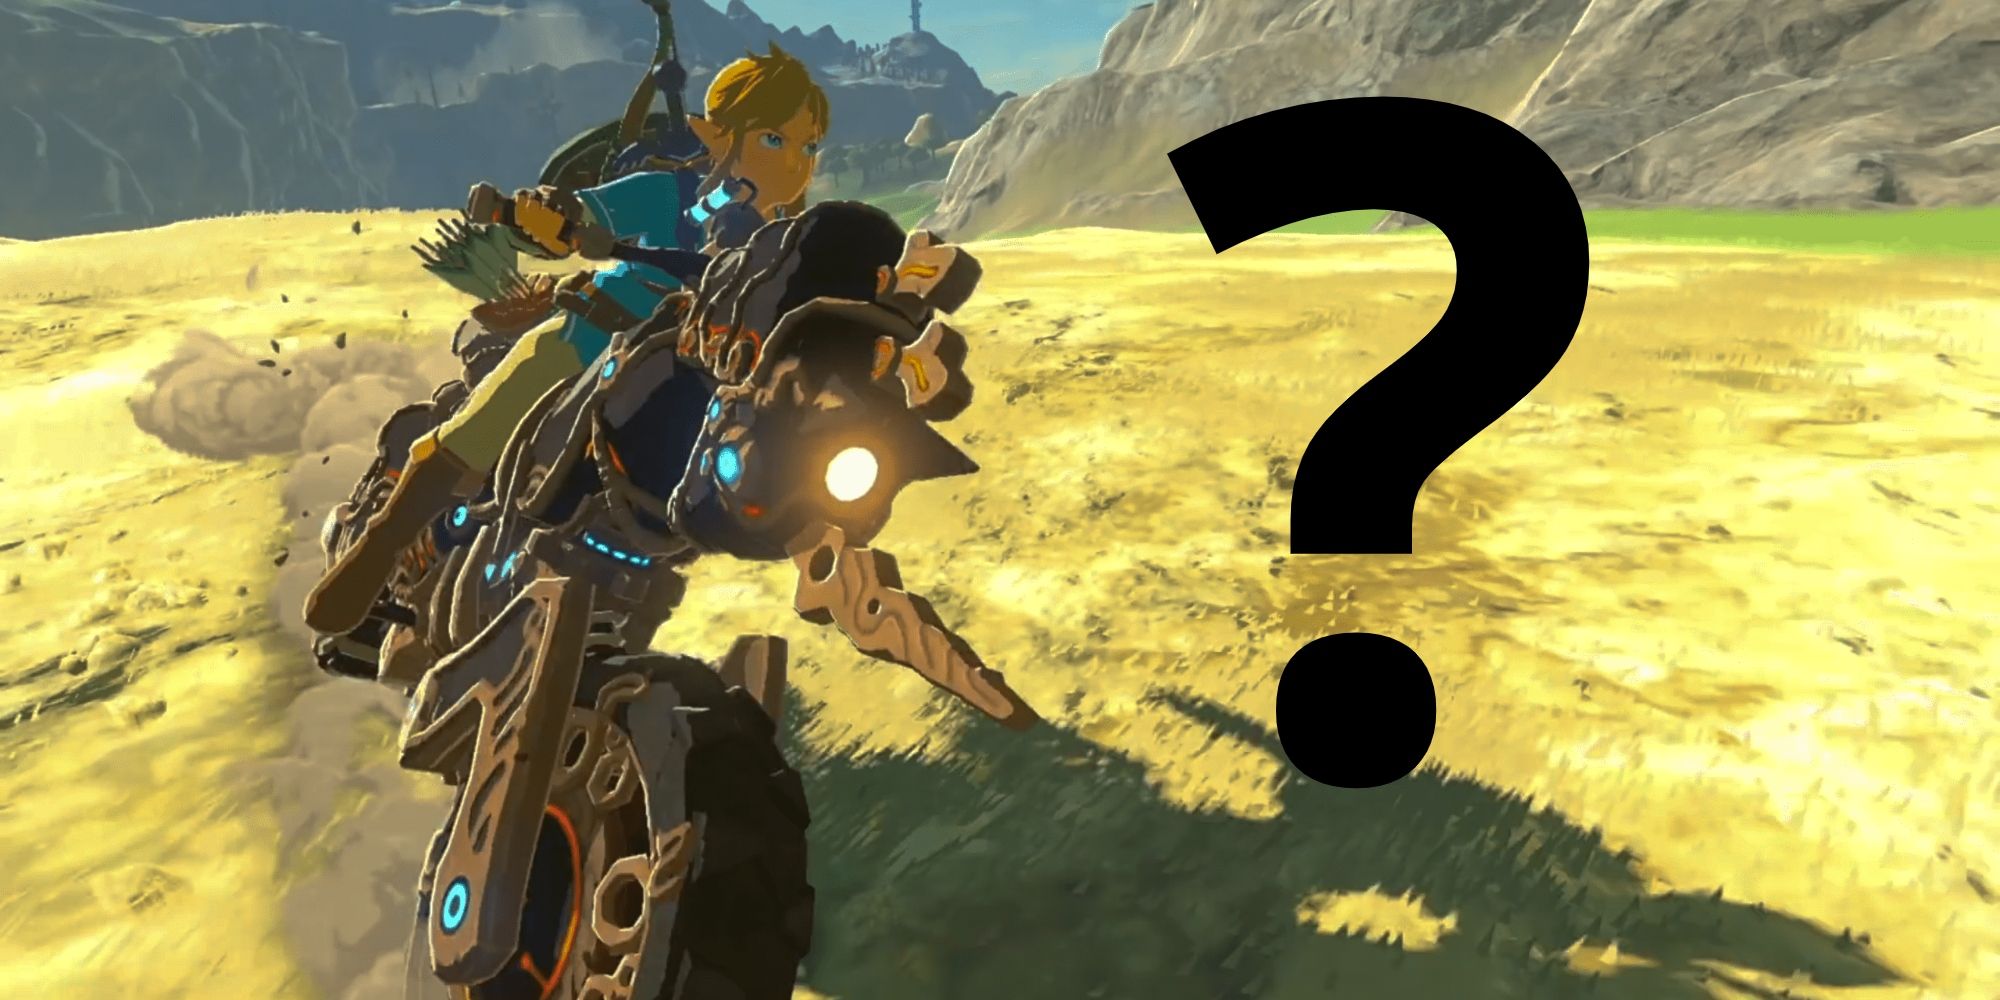 Why Nintendo Bought A BOTW Developer A Motorcycle